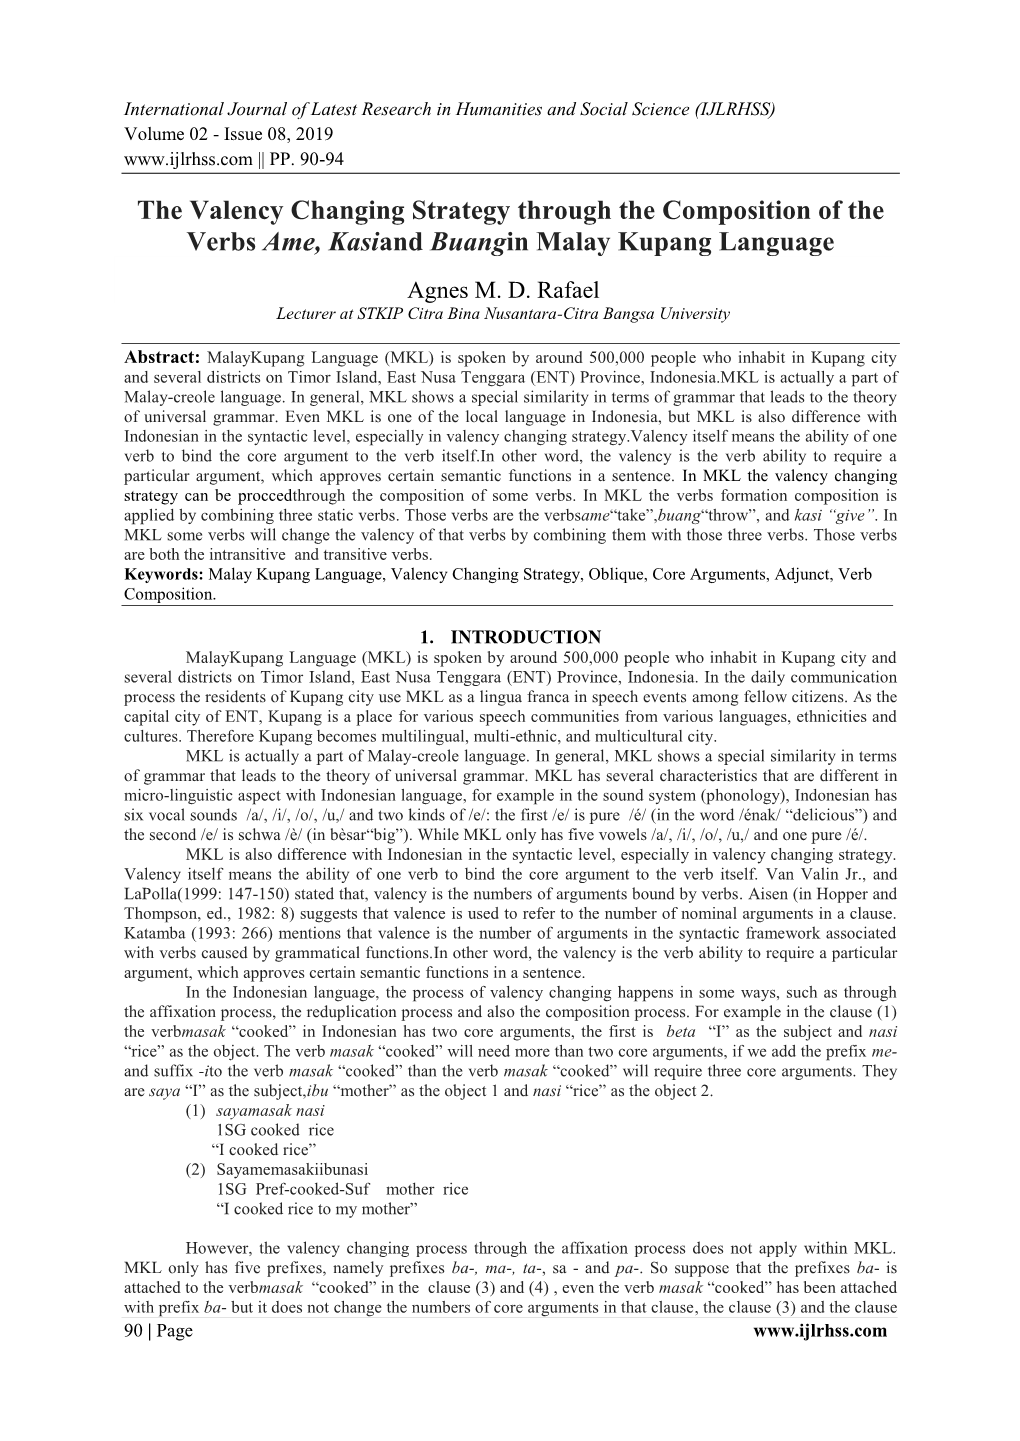 The Valency Changing Strategy Through the Composition of the Verbs Ame, Kasiand Buangin Malay Kupang Language